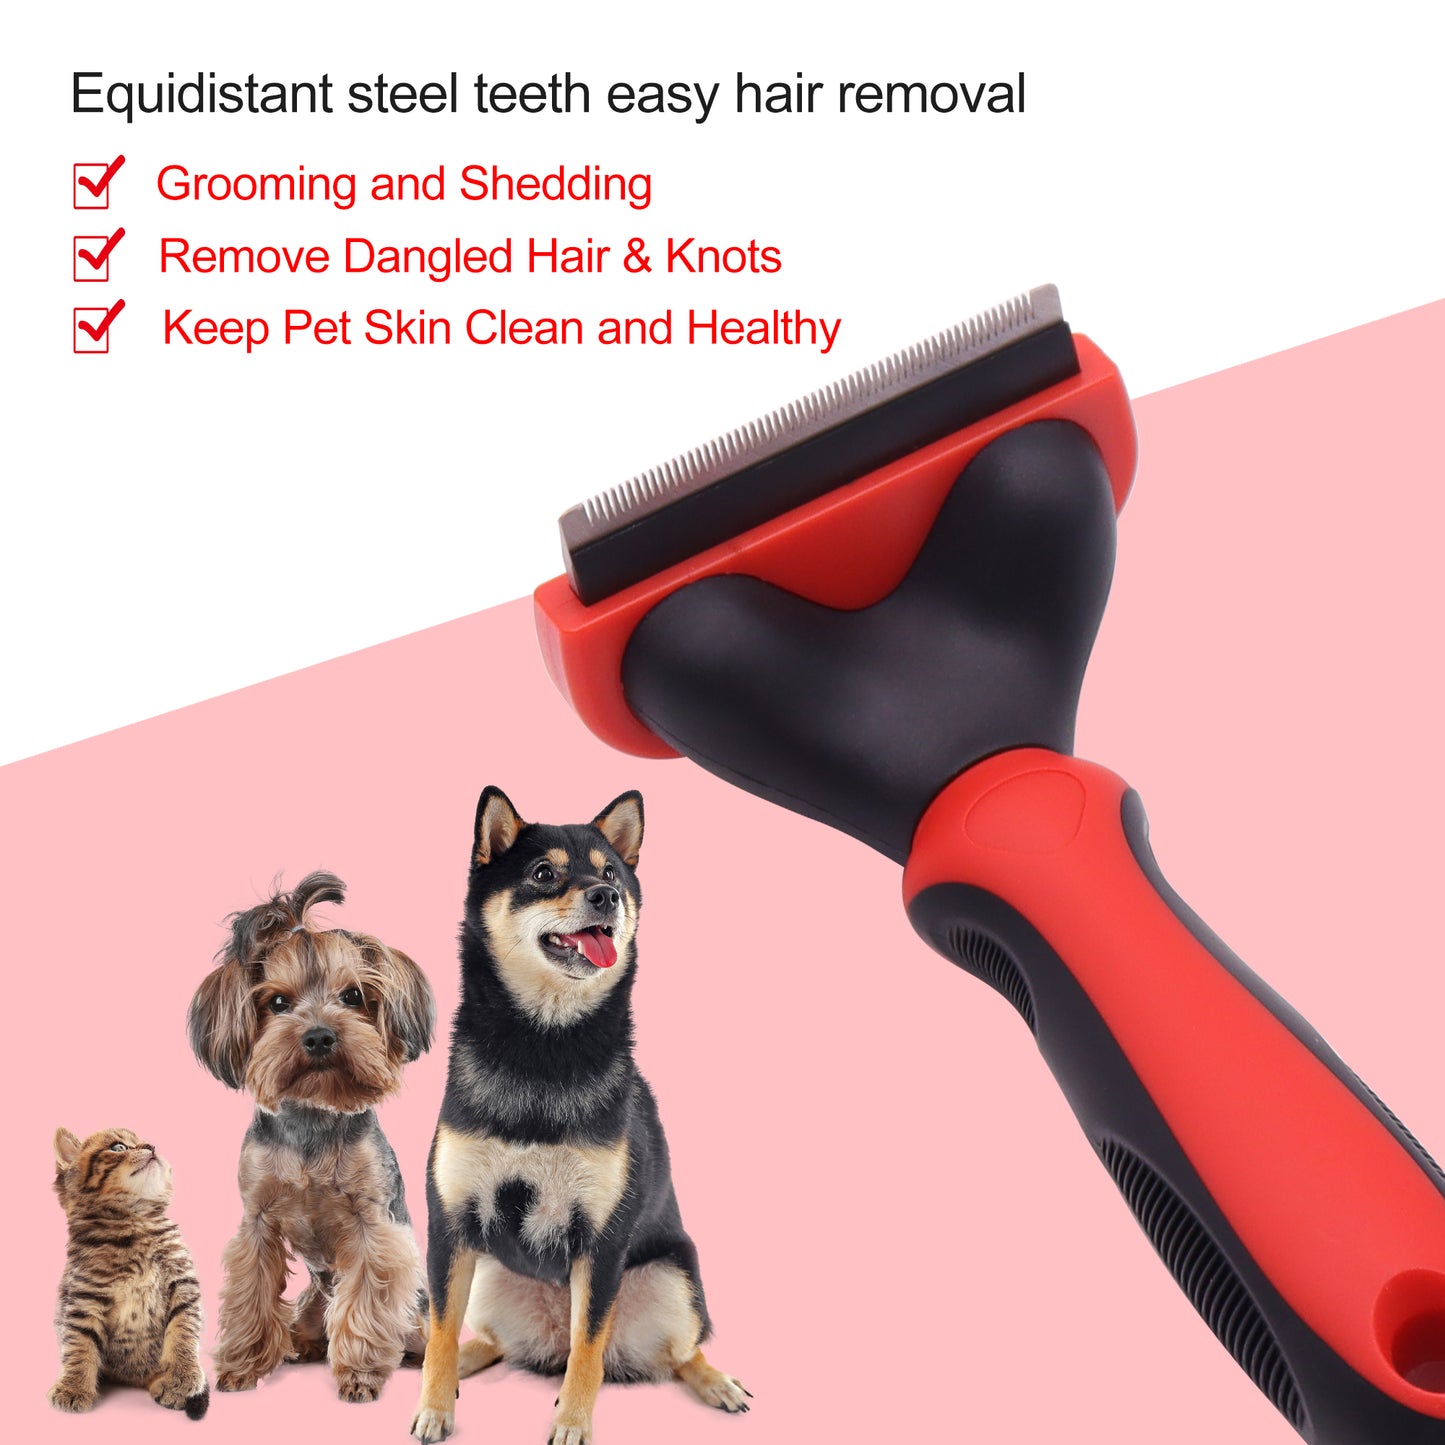 Royal Pets USA Professional Deshedding Brush for Dogs and Cats with Short or Long Hair Effectively Removes Tangles & Dead Hair Up To 95%, Switch Head for Easy Cleaning with Anti-Slip Handle